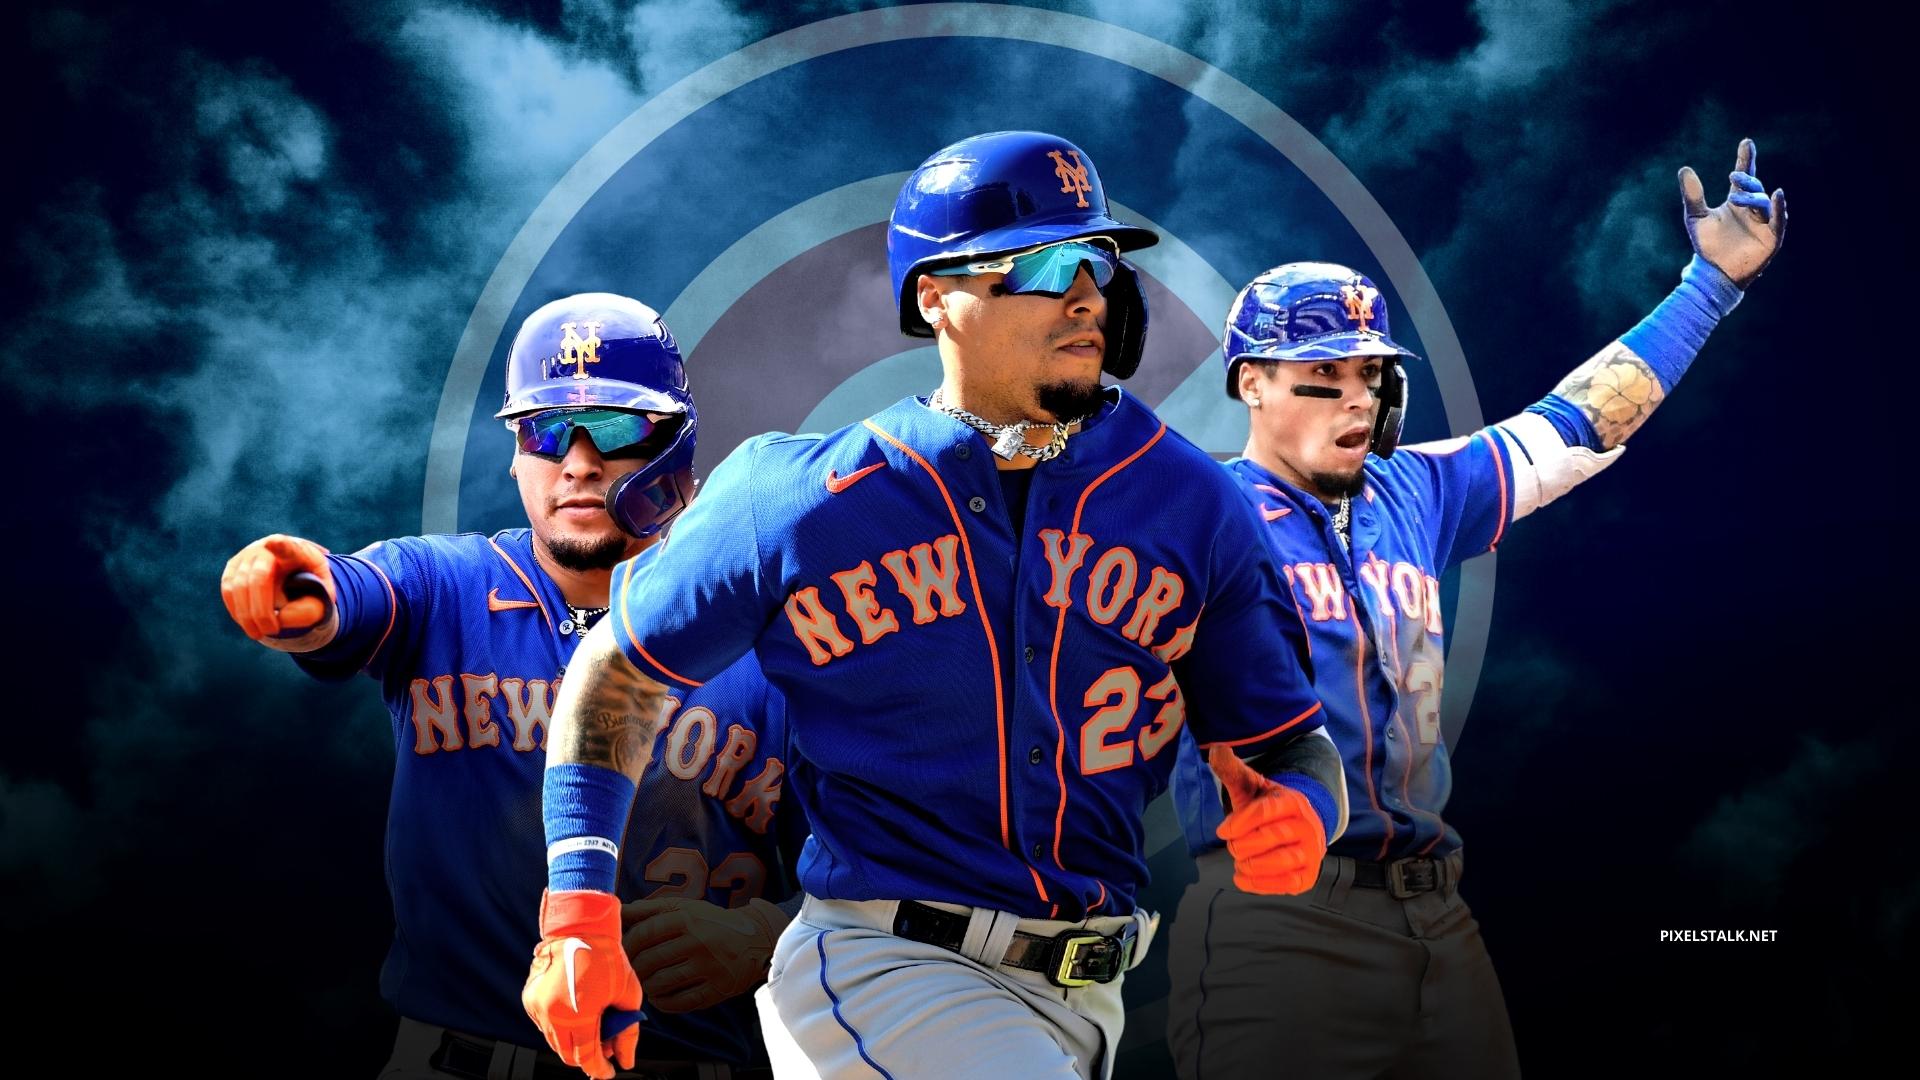 New York Mets on Twitter You need a wallpaper that reminds you to  VoteMets every day WallpaperWednesday Vote 5x a day   httpstco685VW7zKfl httpstcodMD3BP6oiu  X